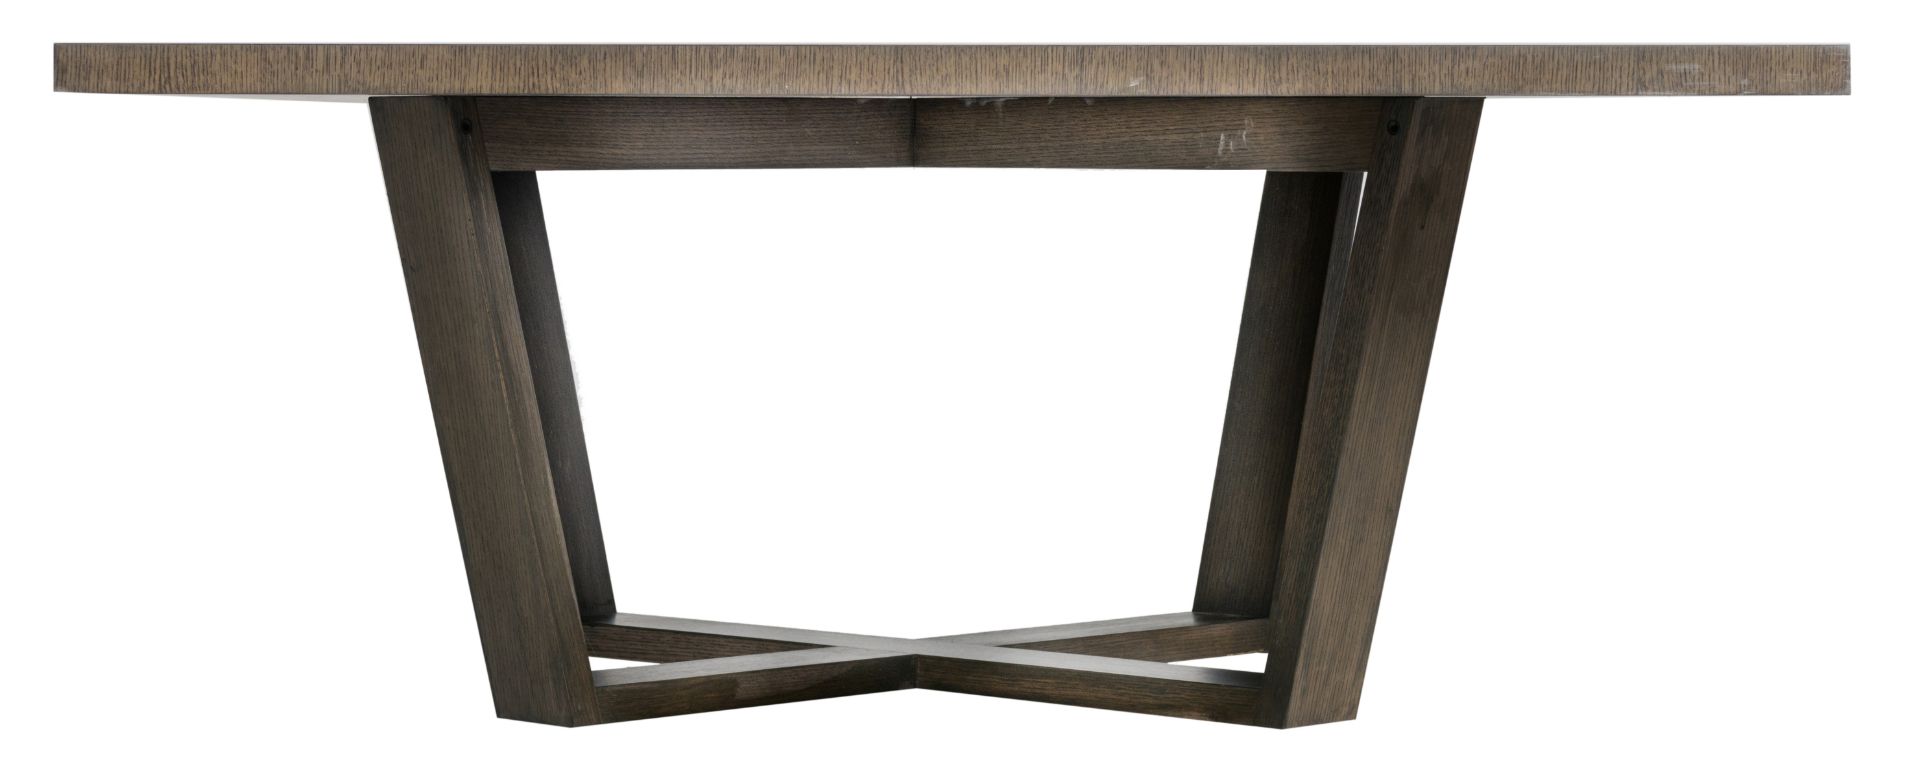 A square 'Xilos' dining table, by Antonio Citterio for B&B Italia, H 178 - W 73 cm - Image 5 of 13